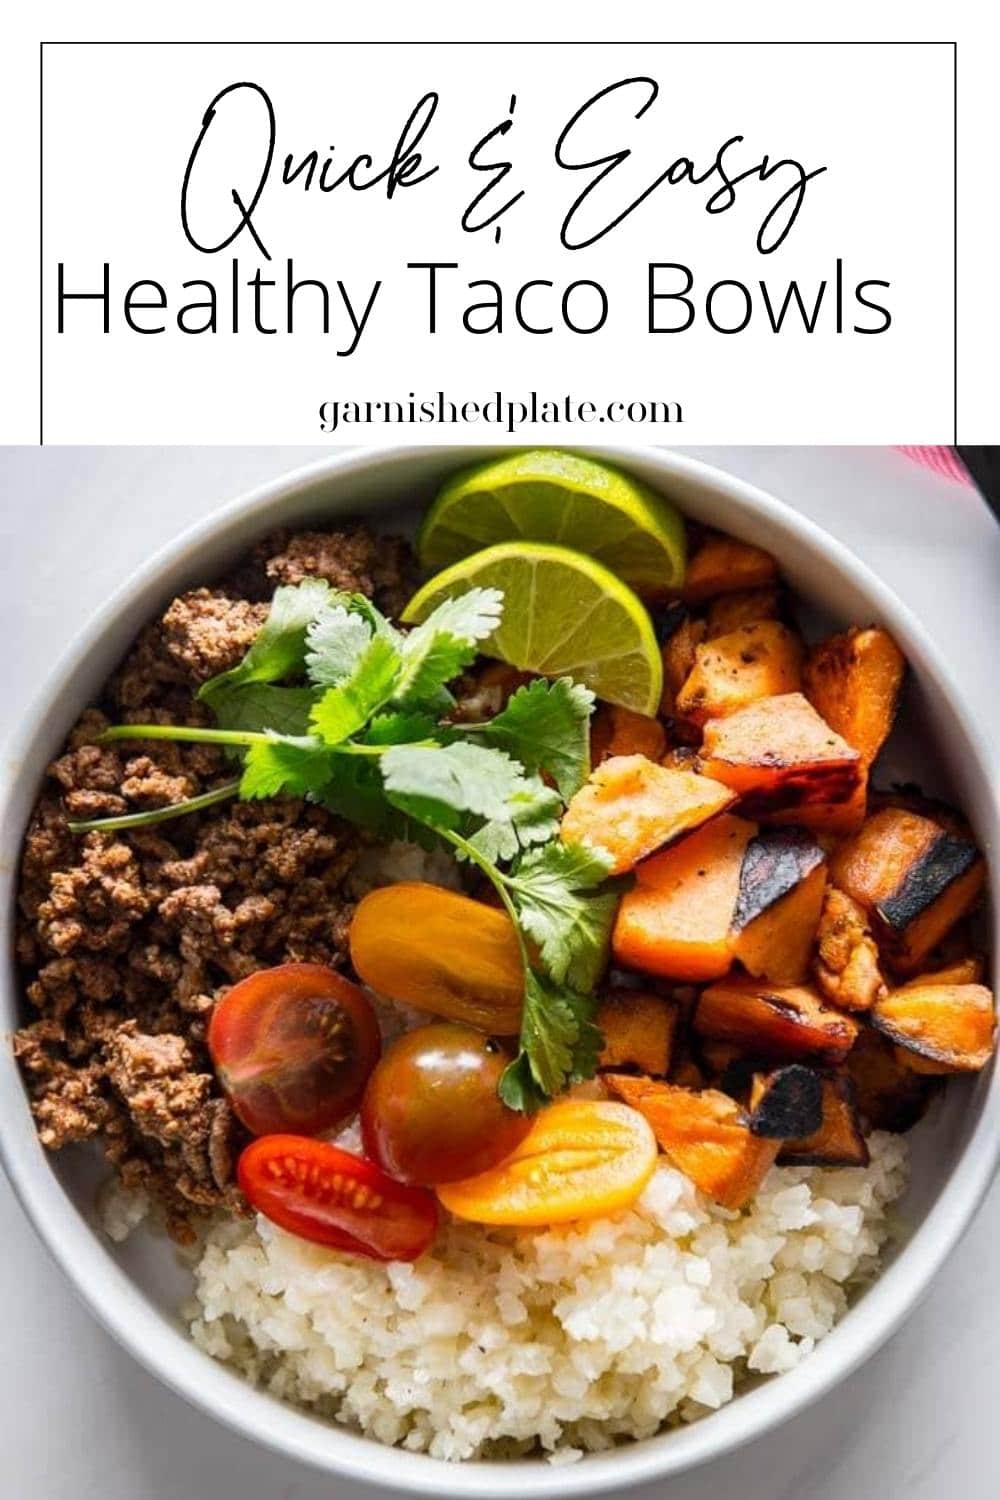 Quick & Easy Healthy Taco Bowl - Garnished Plate